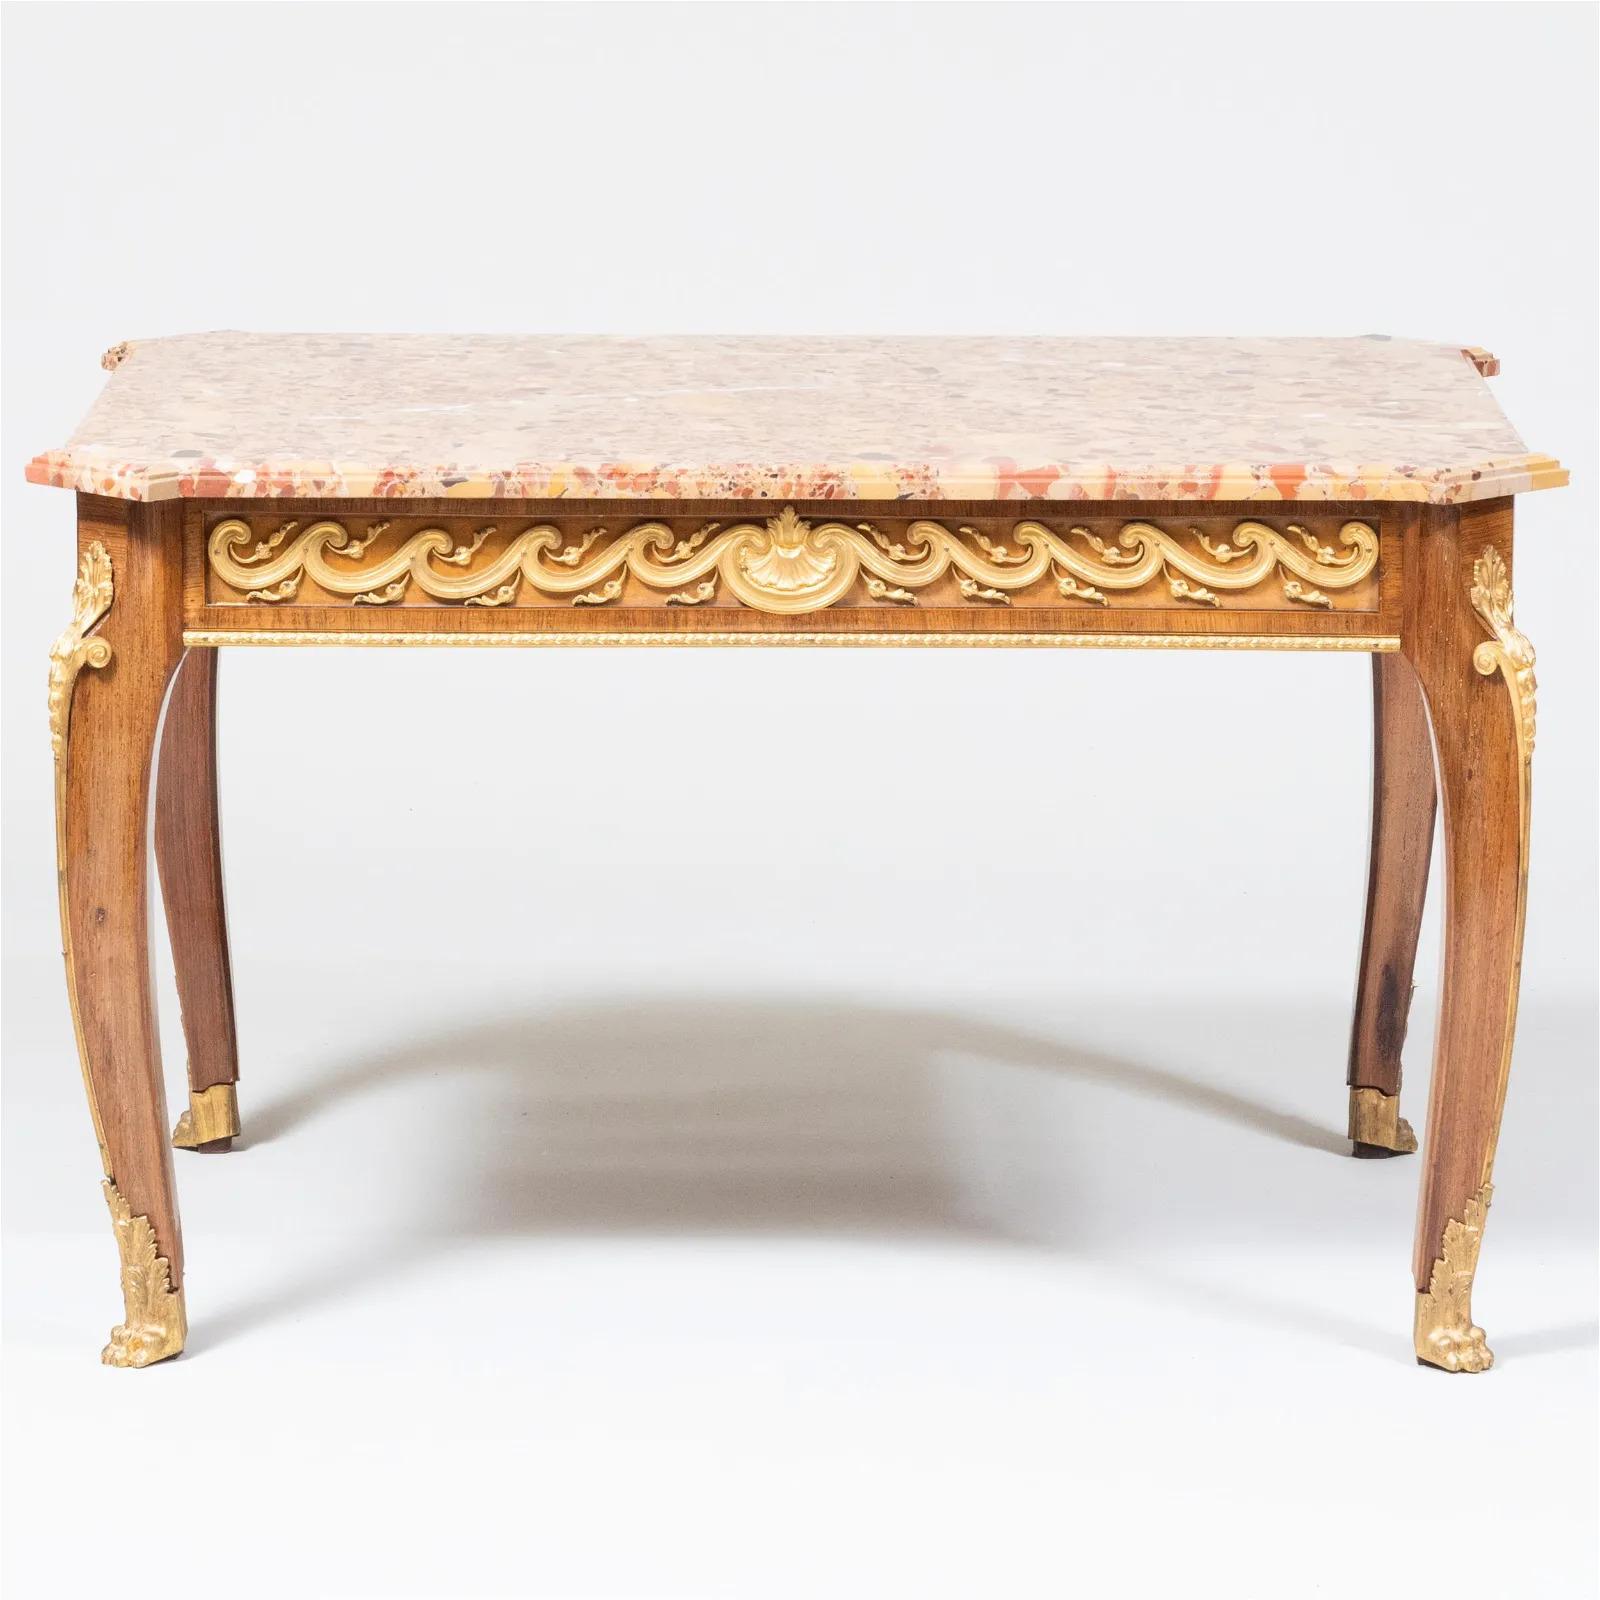 A French Louis XVI Style Ormolu-Mounted Mahogany Coffee Table, C. 1880
fitted with a Breche d 'Alep marble top and two end drawers.

A remarkable piece that showcases the elegance and craftsmanship characteristic of the Louis XVI era. Crafted in the